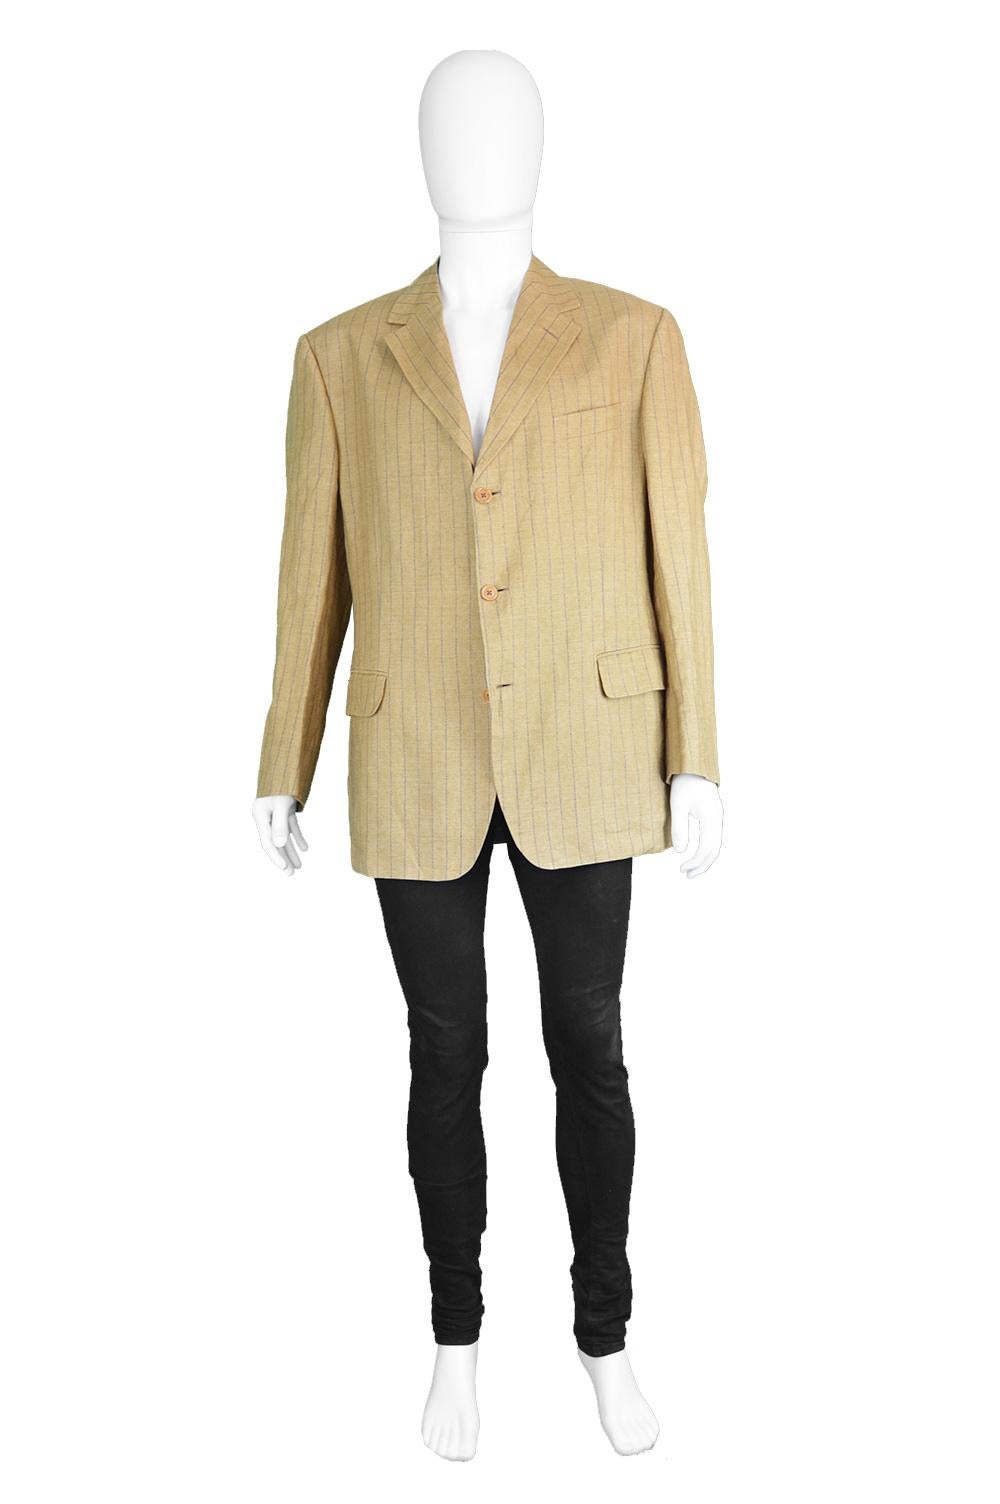 Romeo Gigli Men's Vintage Mustard Yellow Pinstripe Linen Blazer Jacket, 1990s

Size: Marked EU 52R which is roughly a men's Large (Check measurements to ensure best fit)
Chest - 44” / 112cm (allow a couple of inches room for movement)
Waist - 42” /